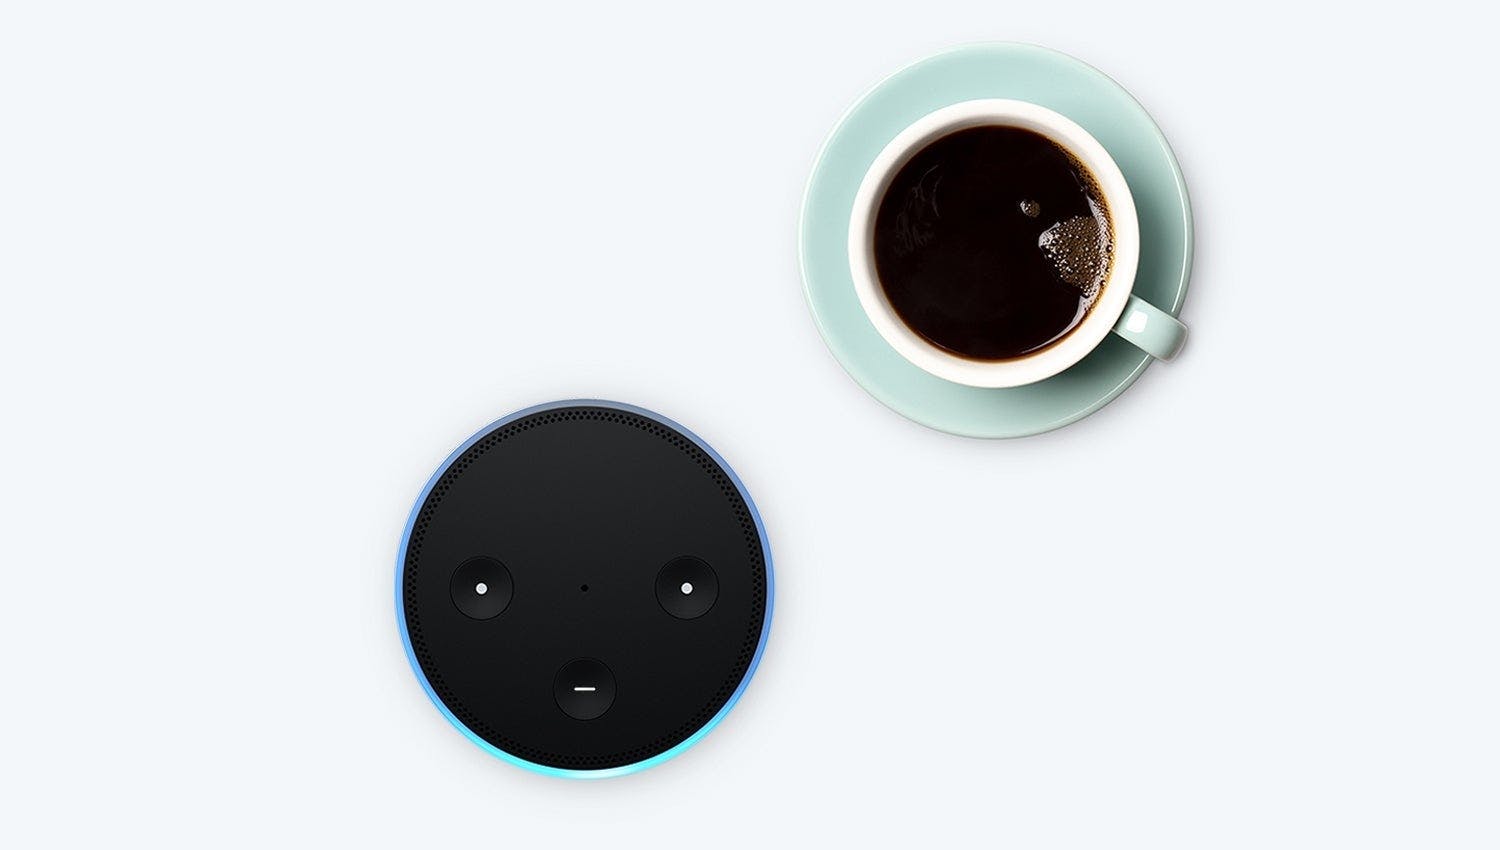 Cup of coffee with a virtual assistant device, representing the impact of AI on our daily routines and home automation systems.